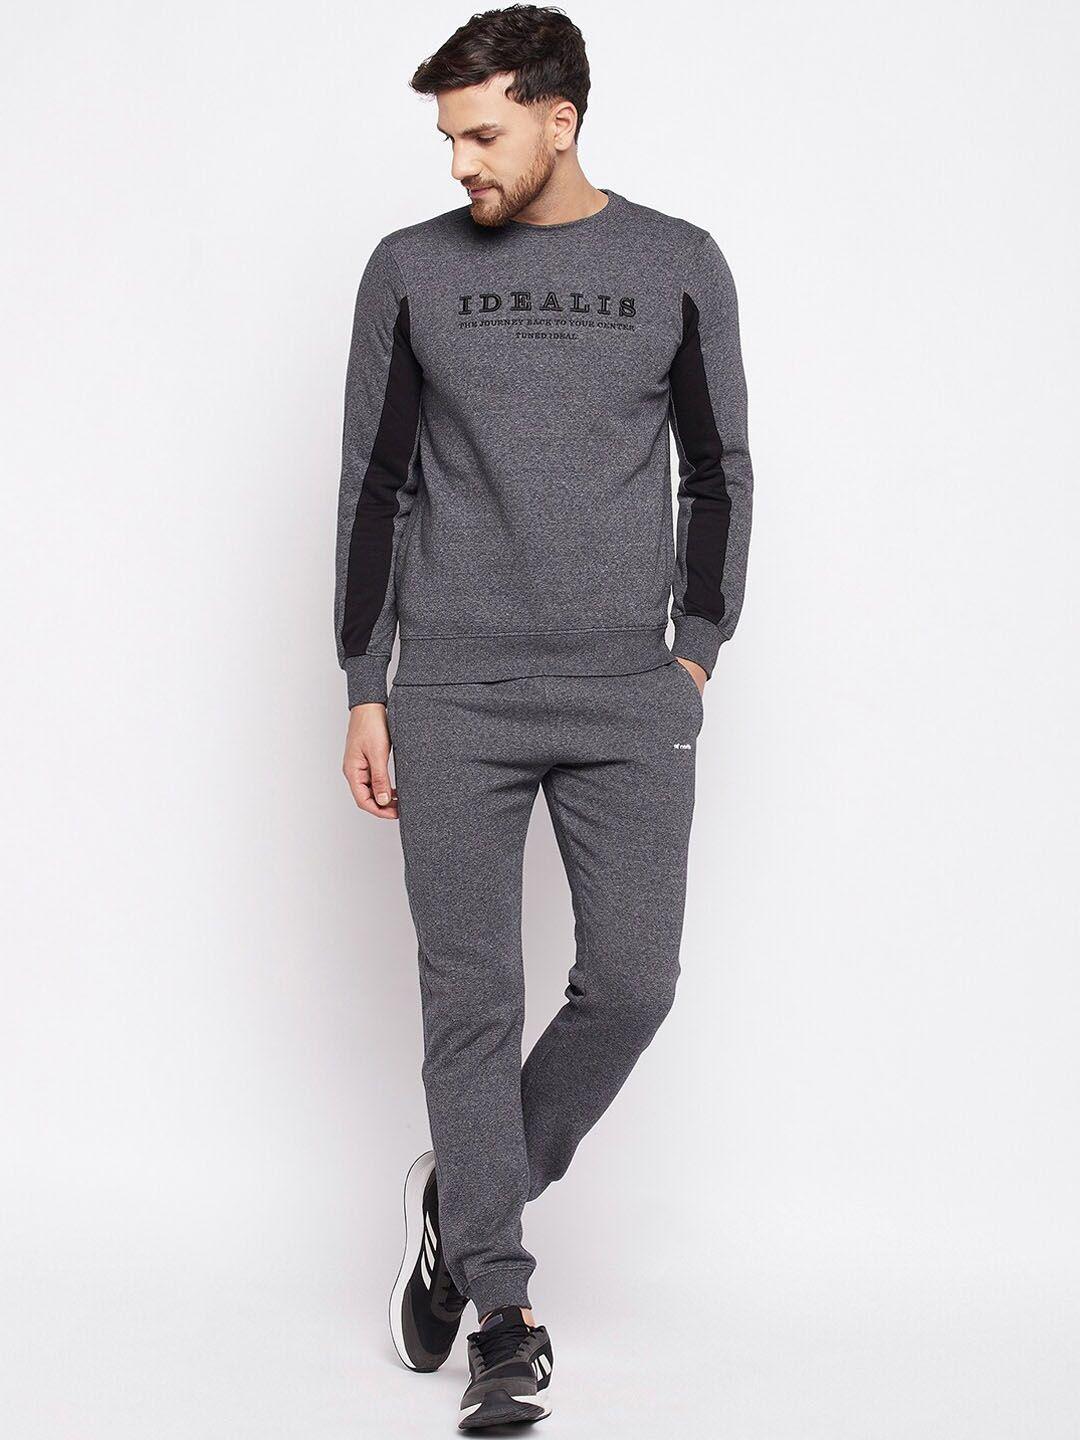 98 degree north mid-rise fleece sports tracksuits